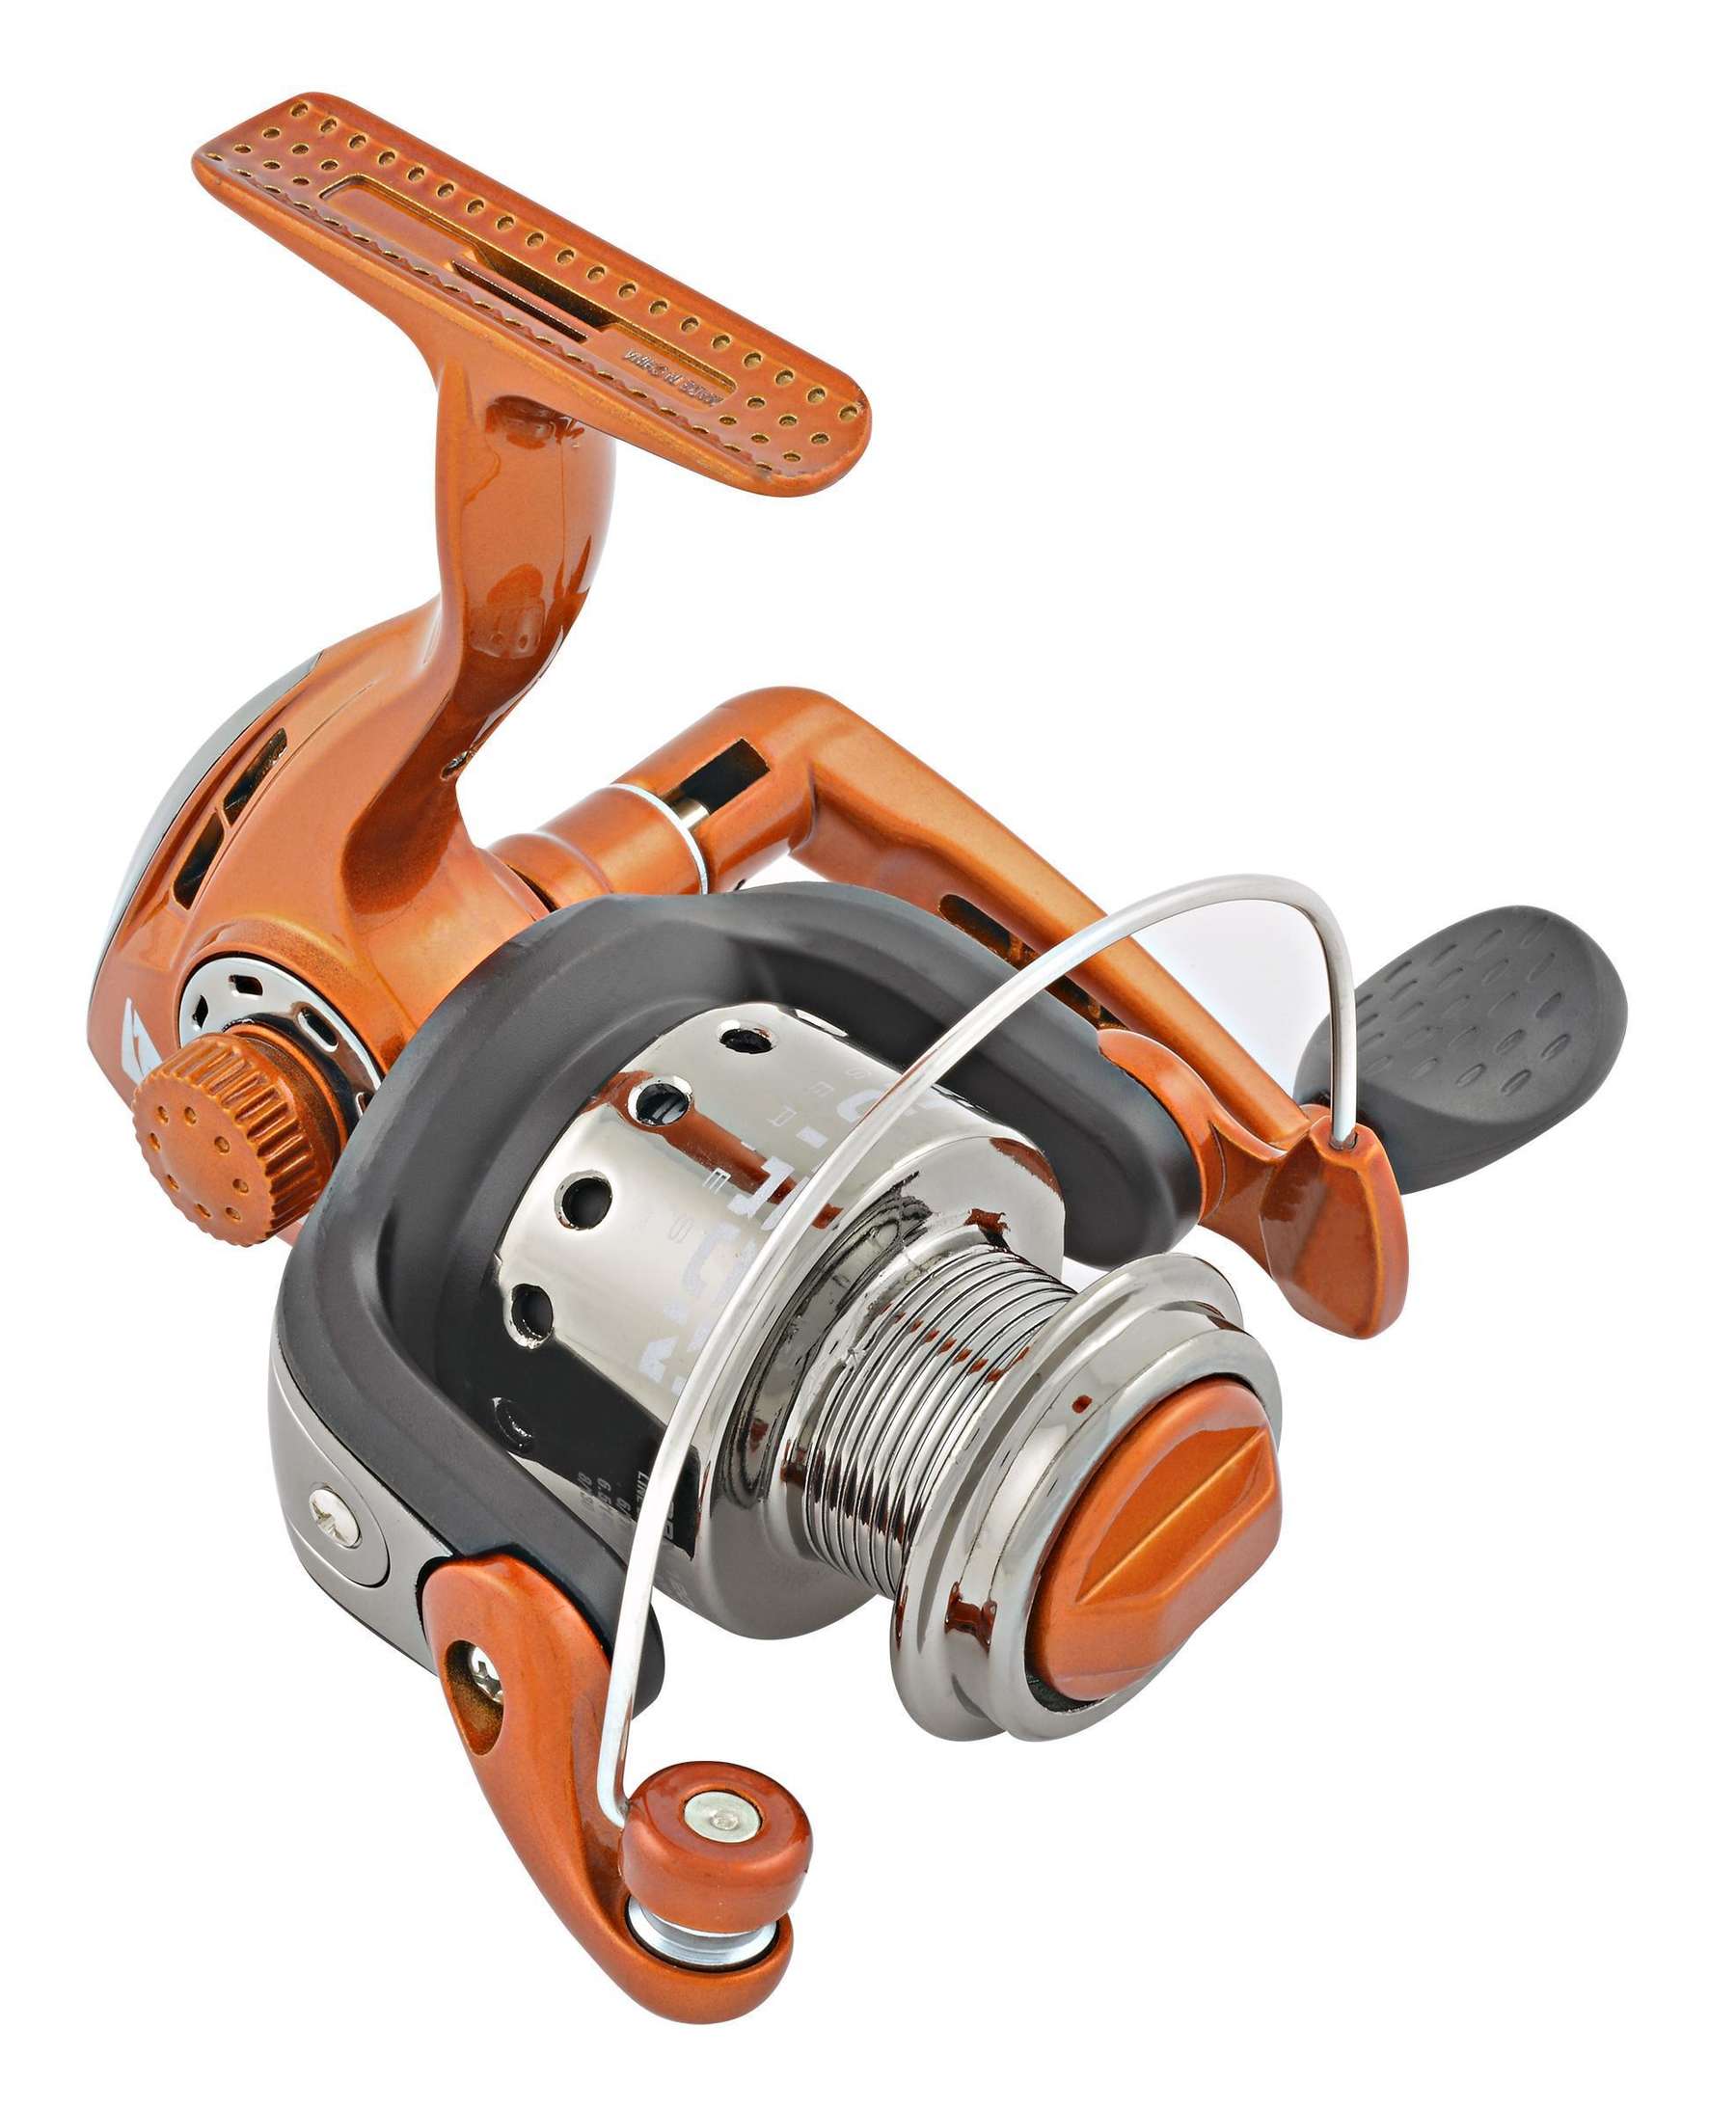 South Bend Blue Neutron Size 30 XL Spincast Reel - Stainless Steel Pick Up  Pin